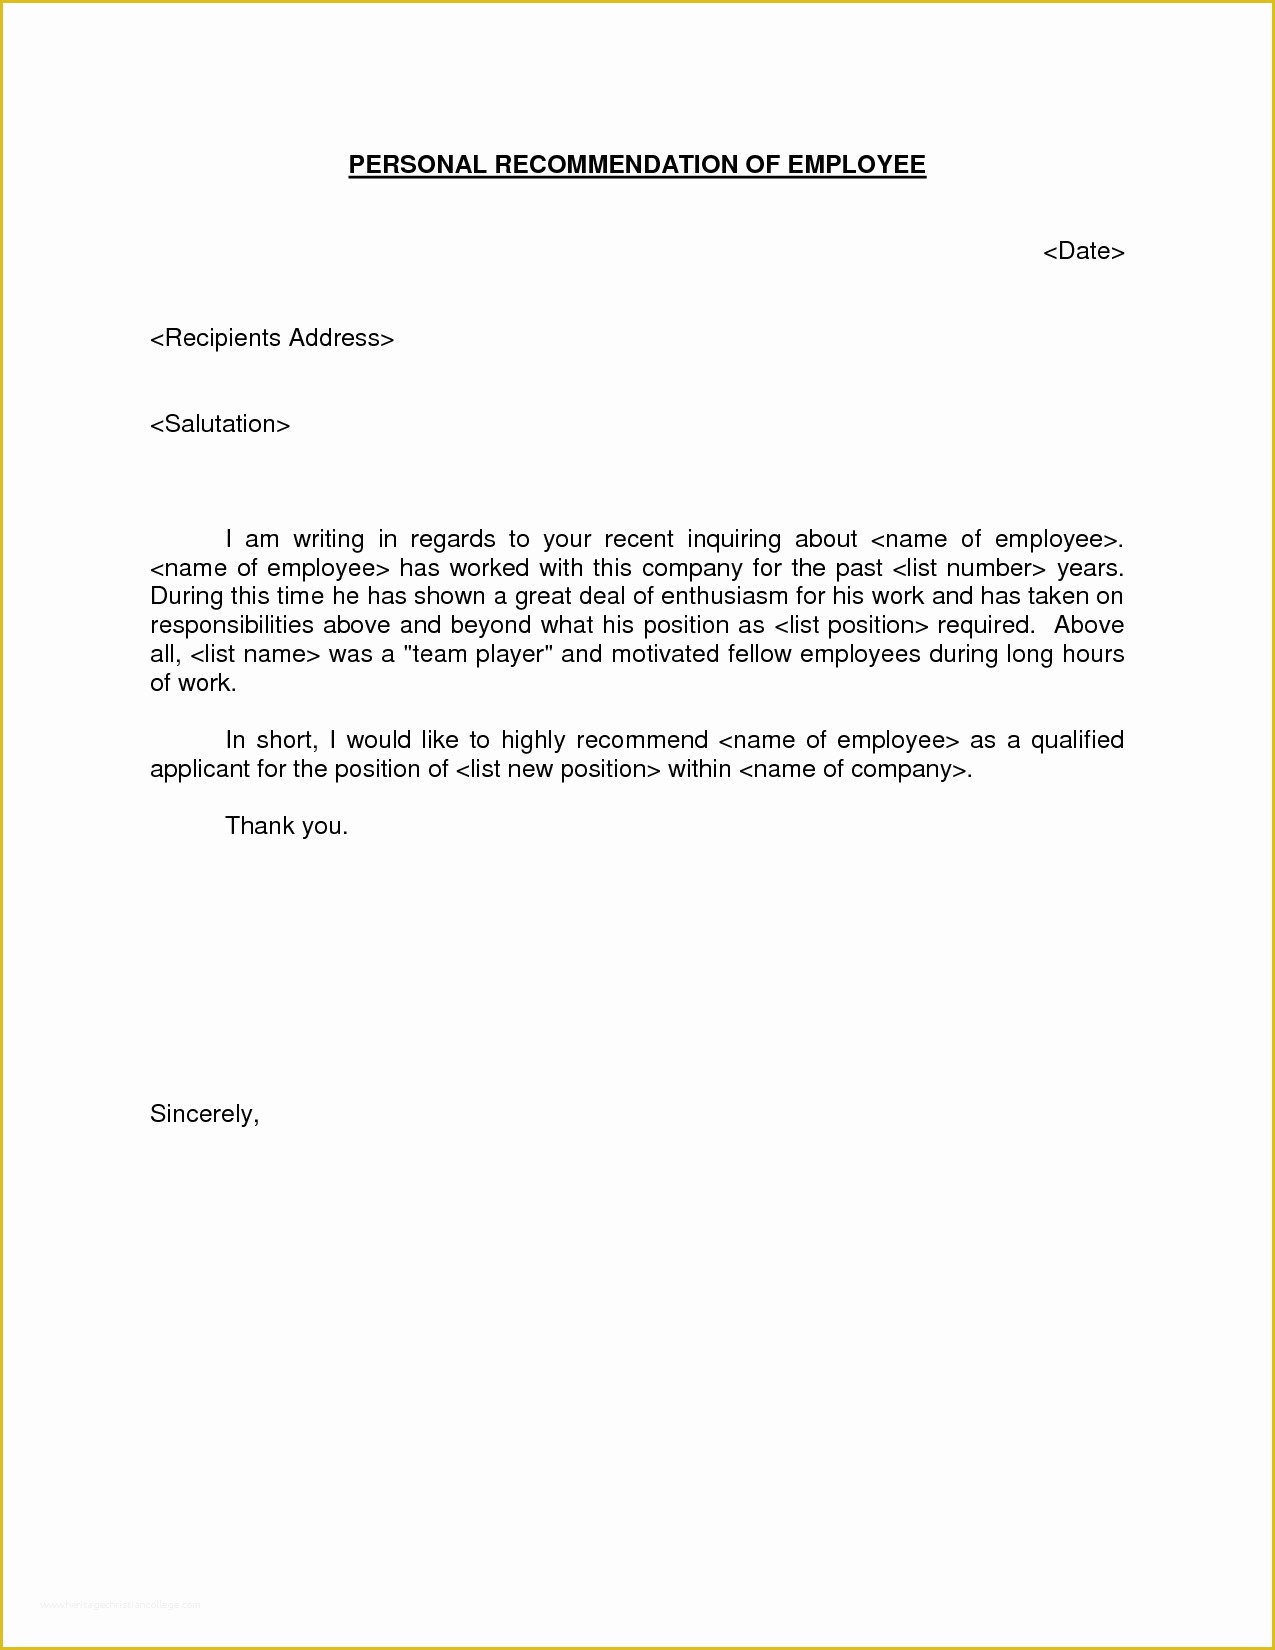 Personal Reference Letter Template Free Of Sample Personal Re Mendation Letter Personal Reference